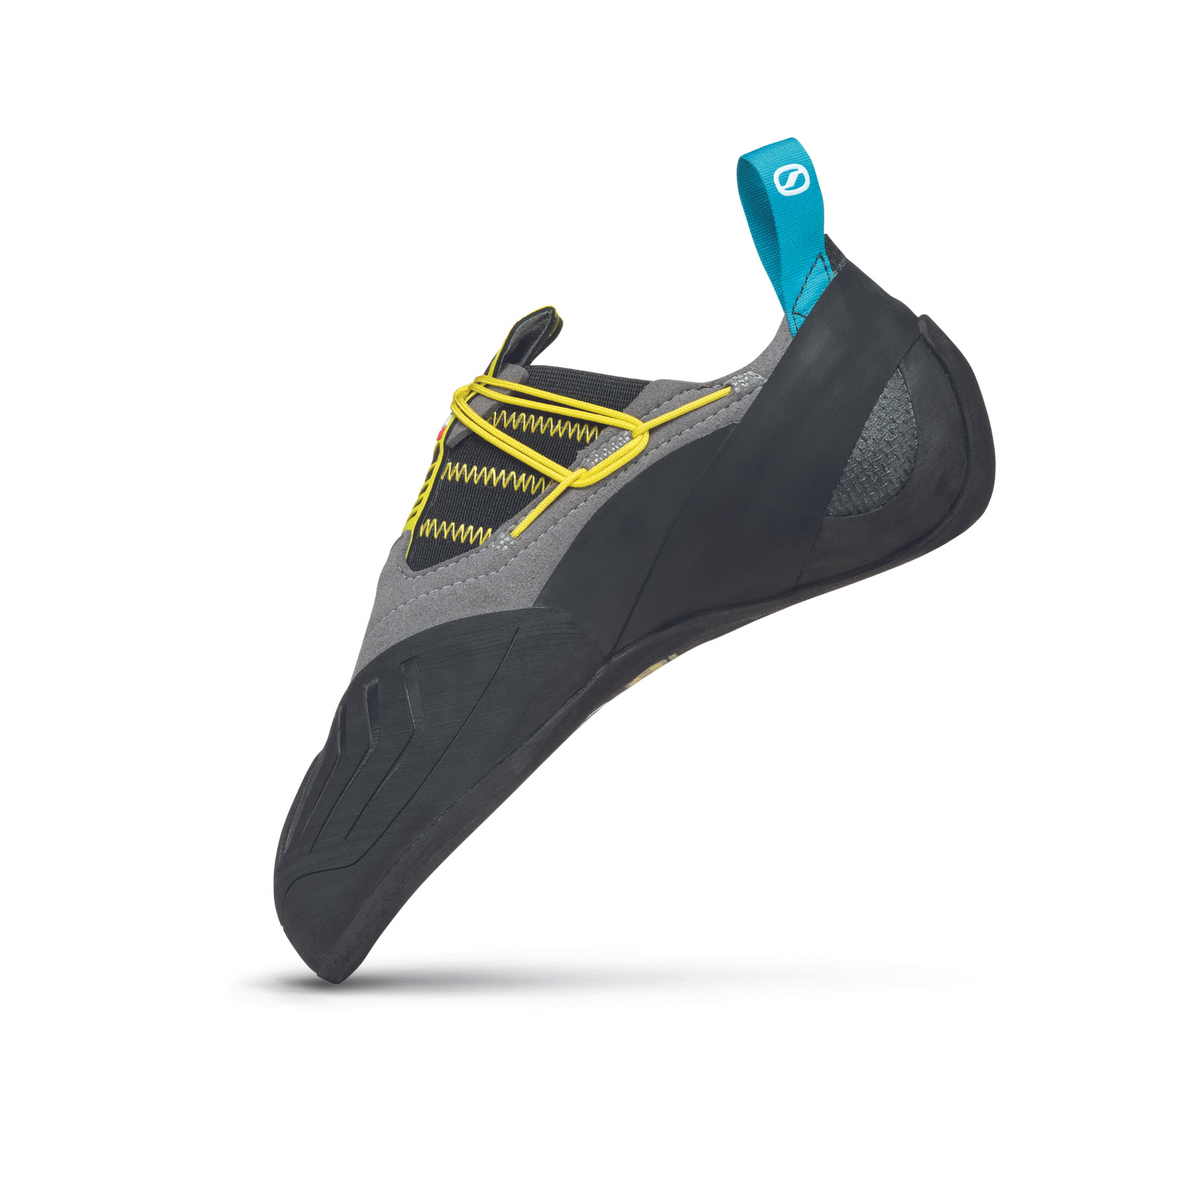 Scarpa Vapour S in smoke-grey with yellow trim. image showing inside sole with removable strap